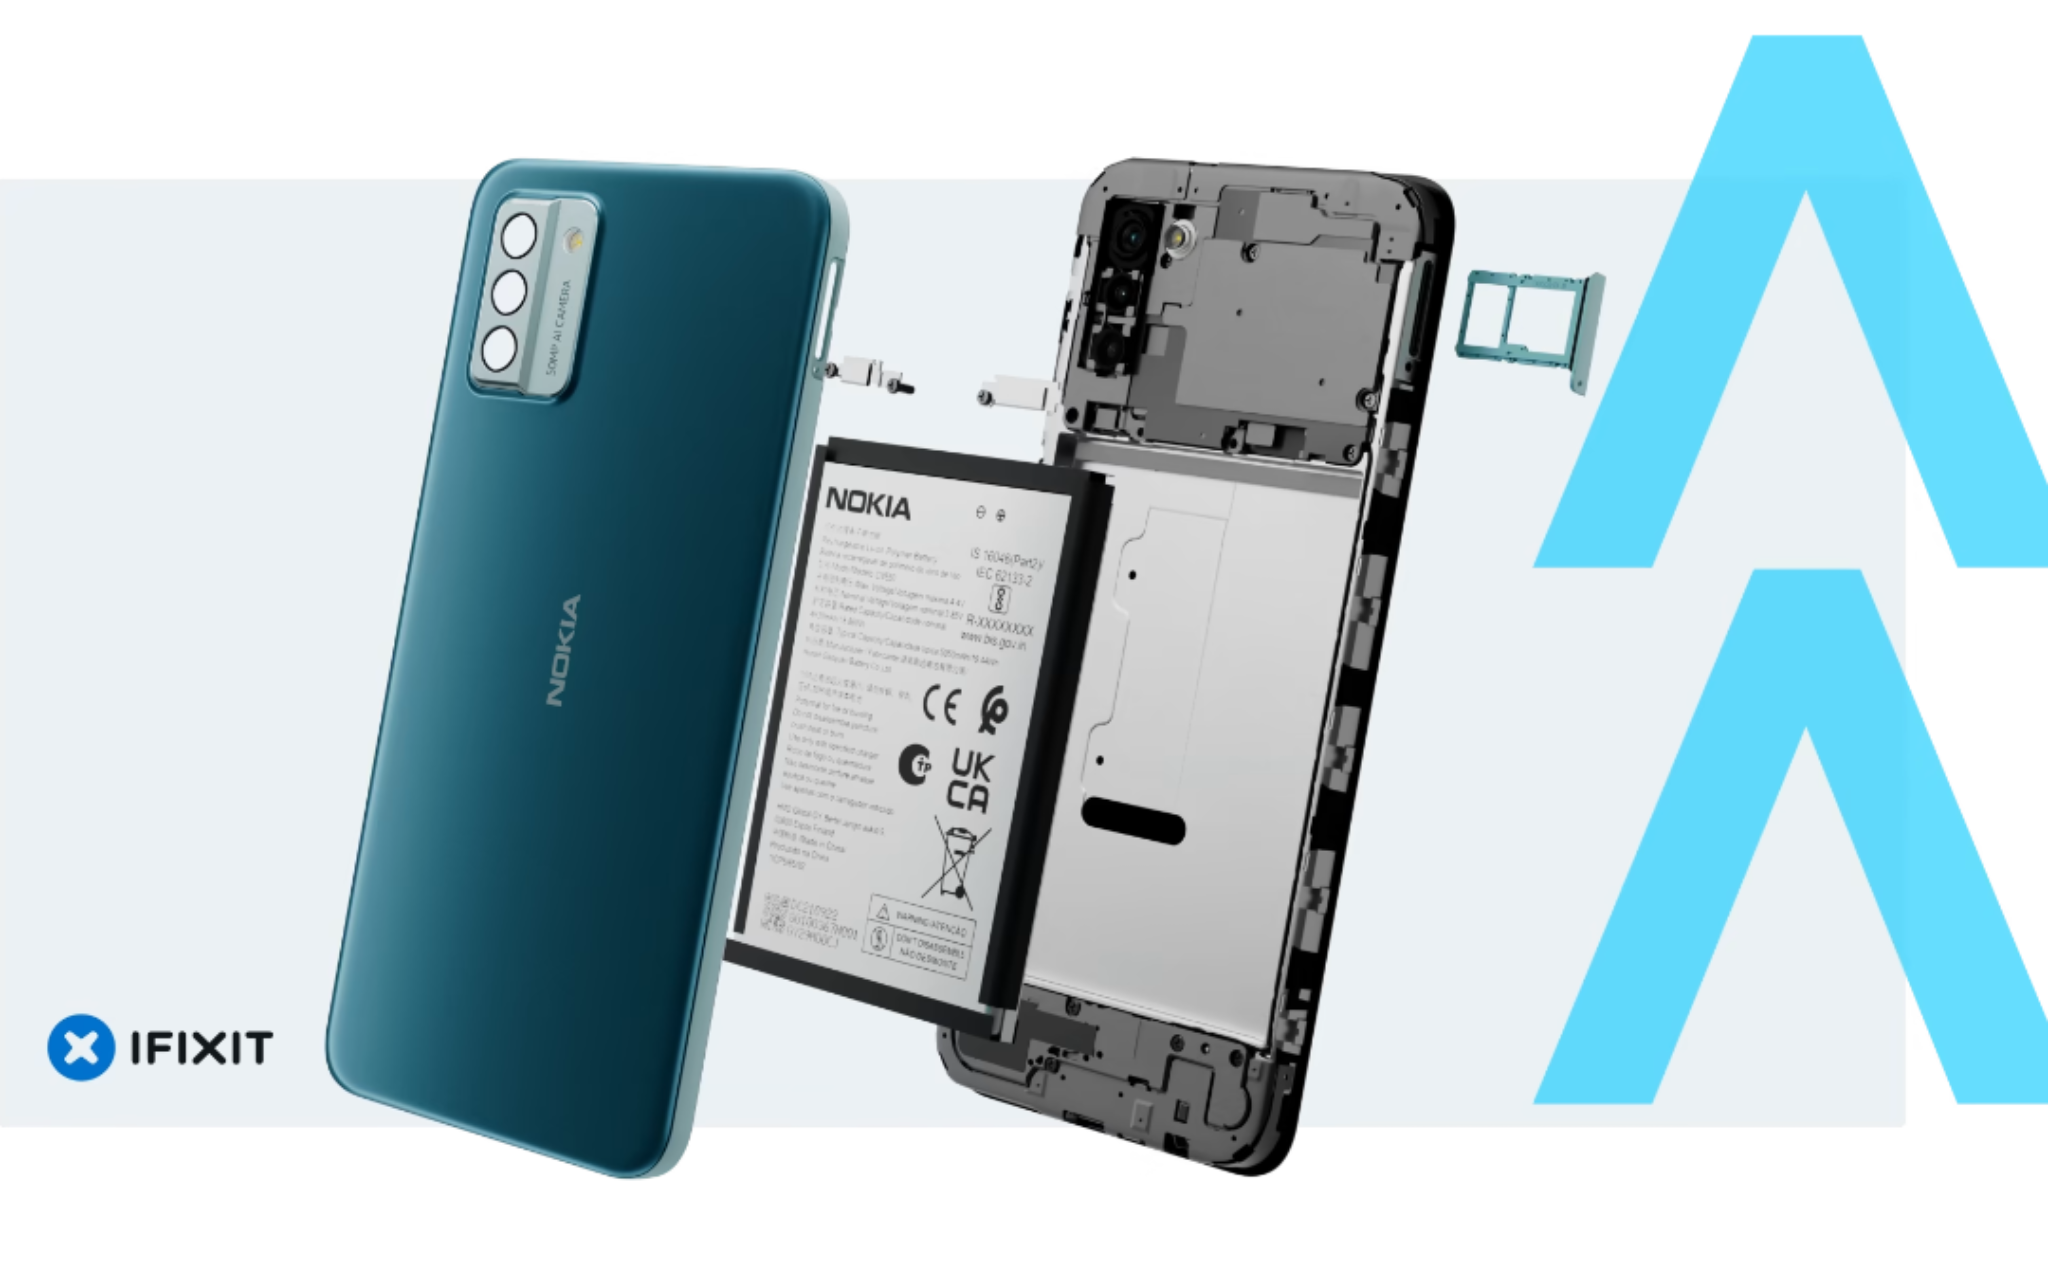 nokia g22 (ifixit repairability) - the go android